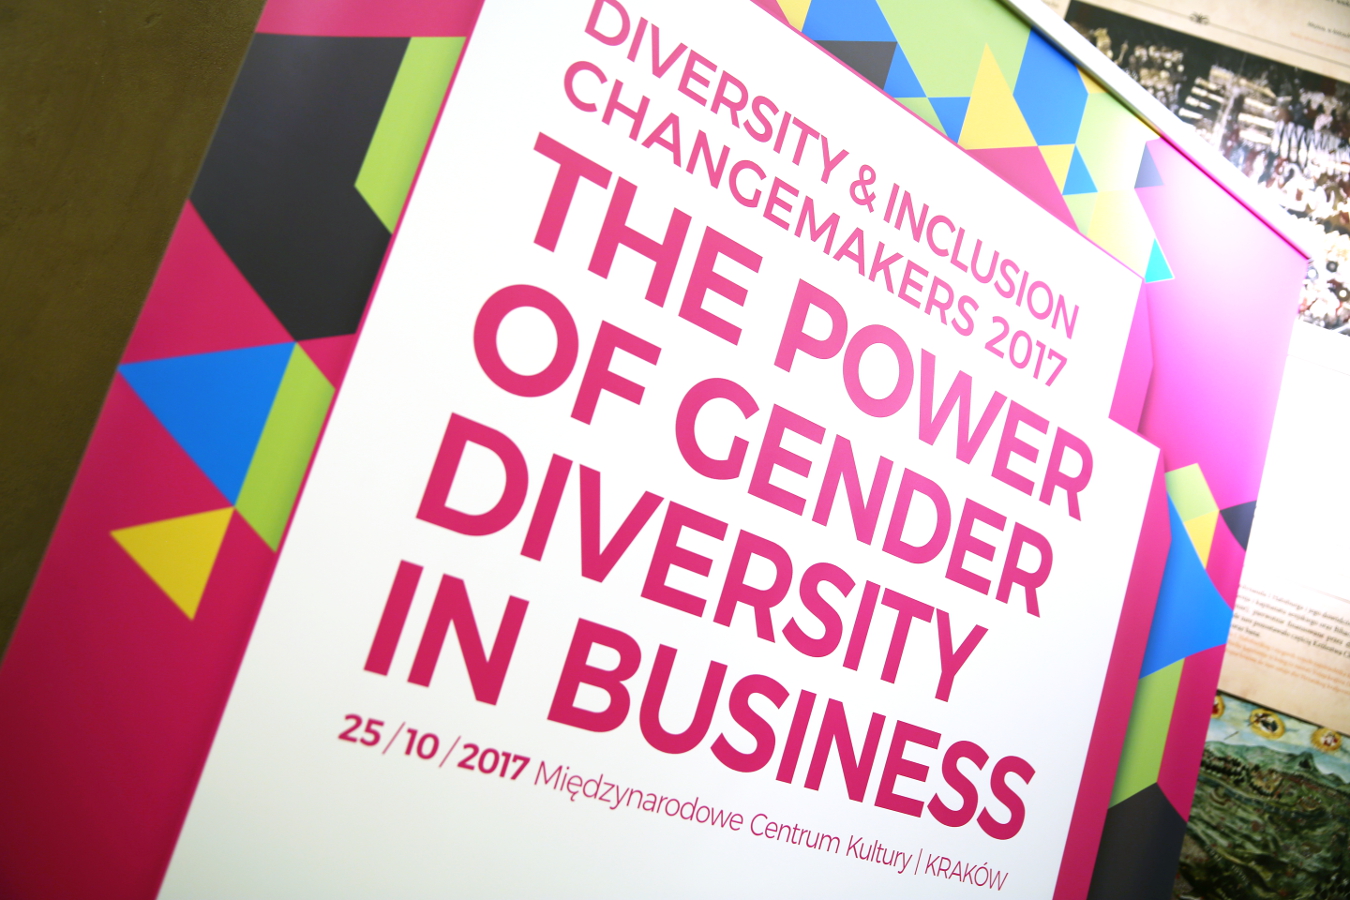 The Power of Gender Diversity in Business